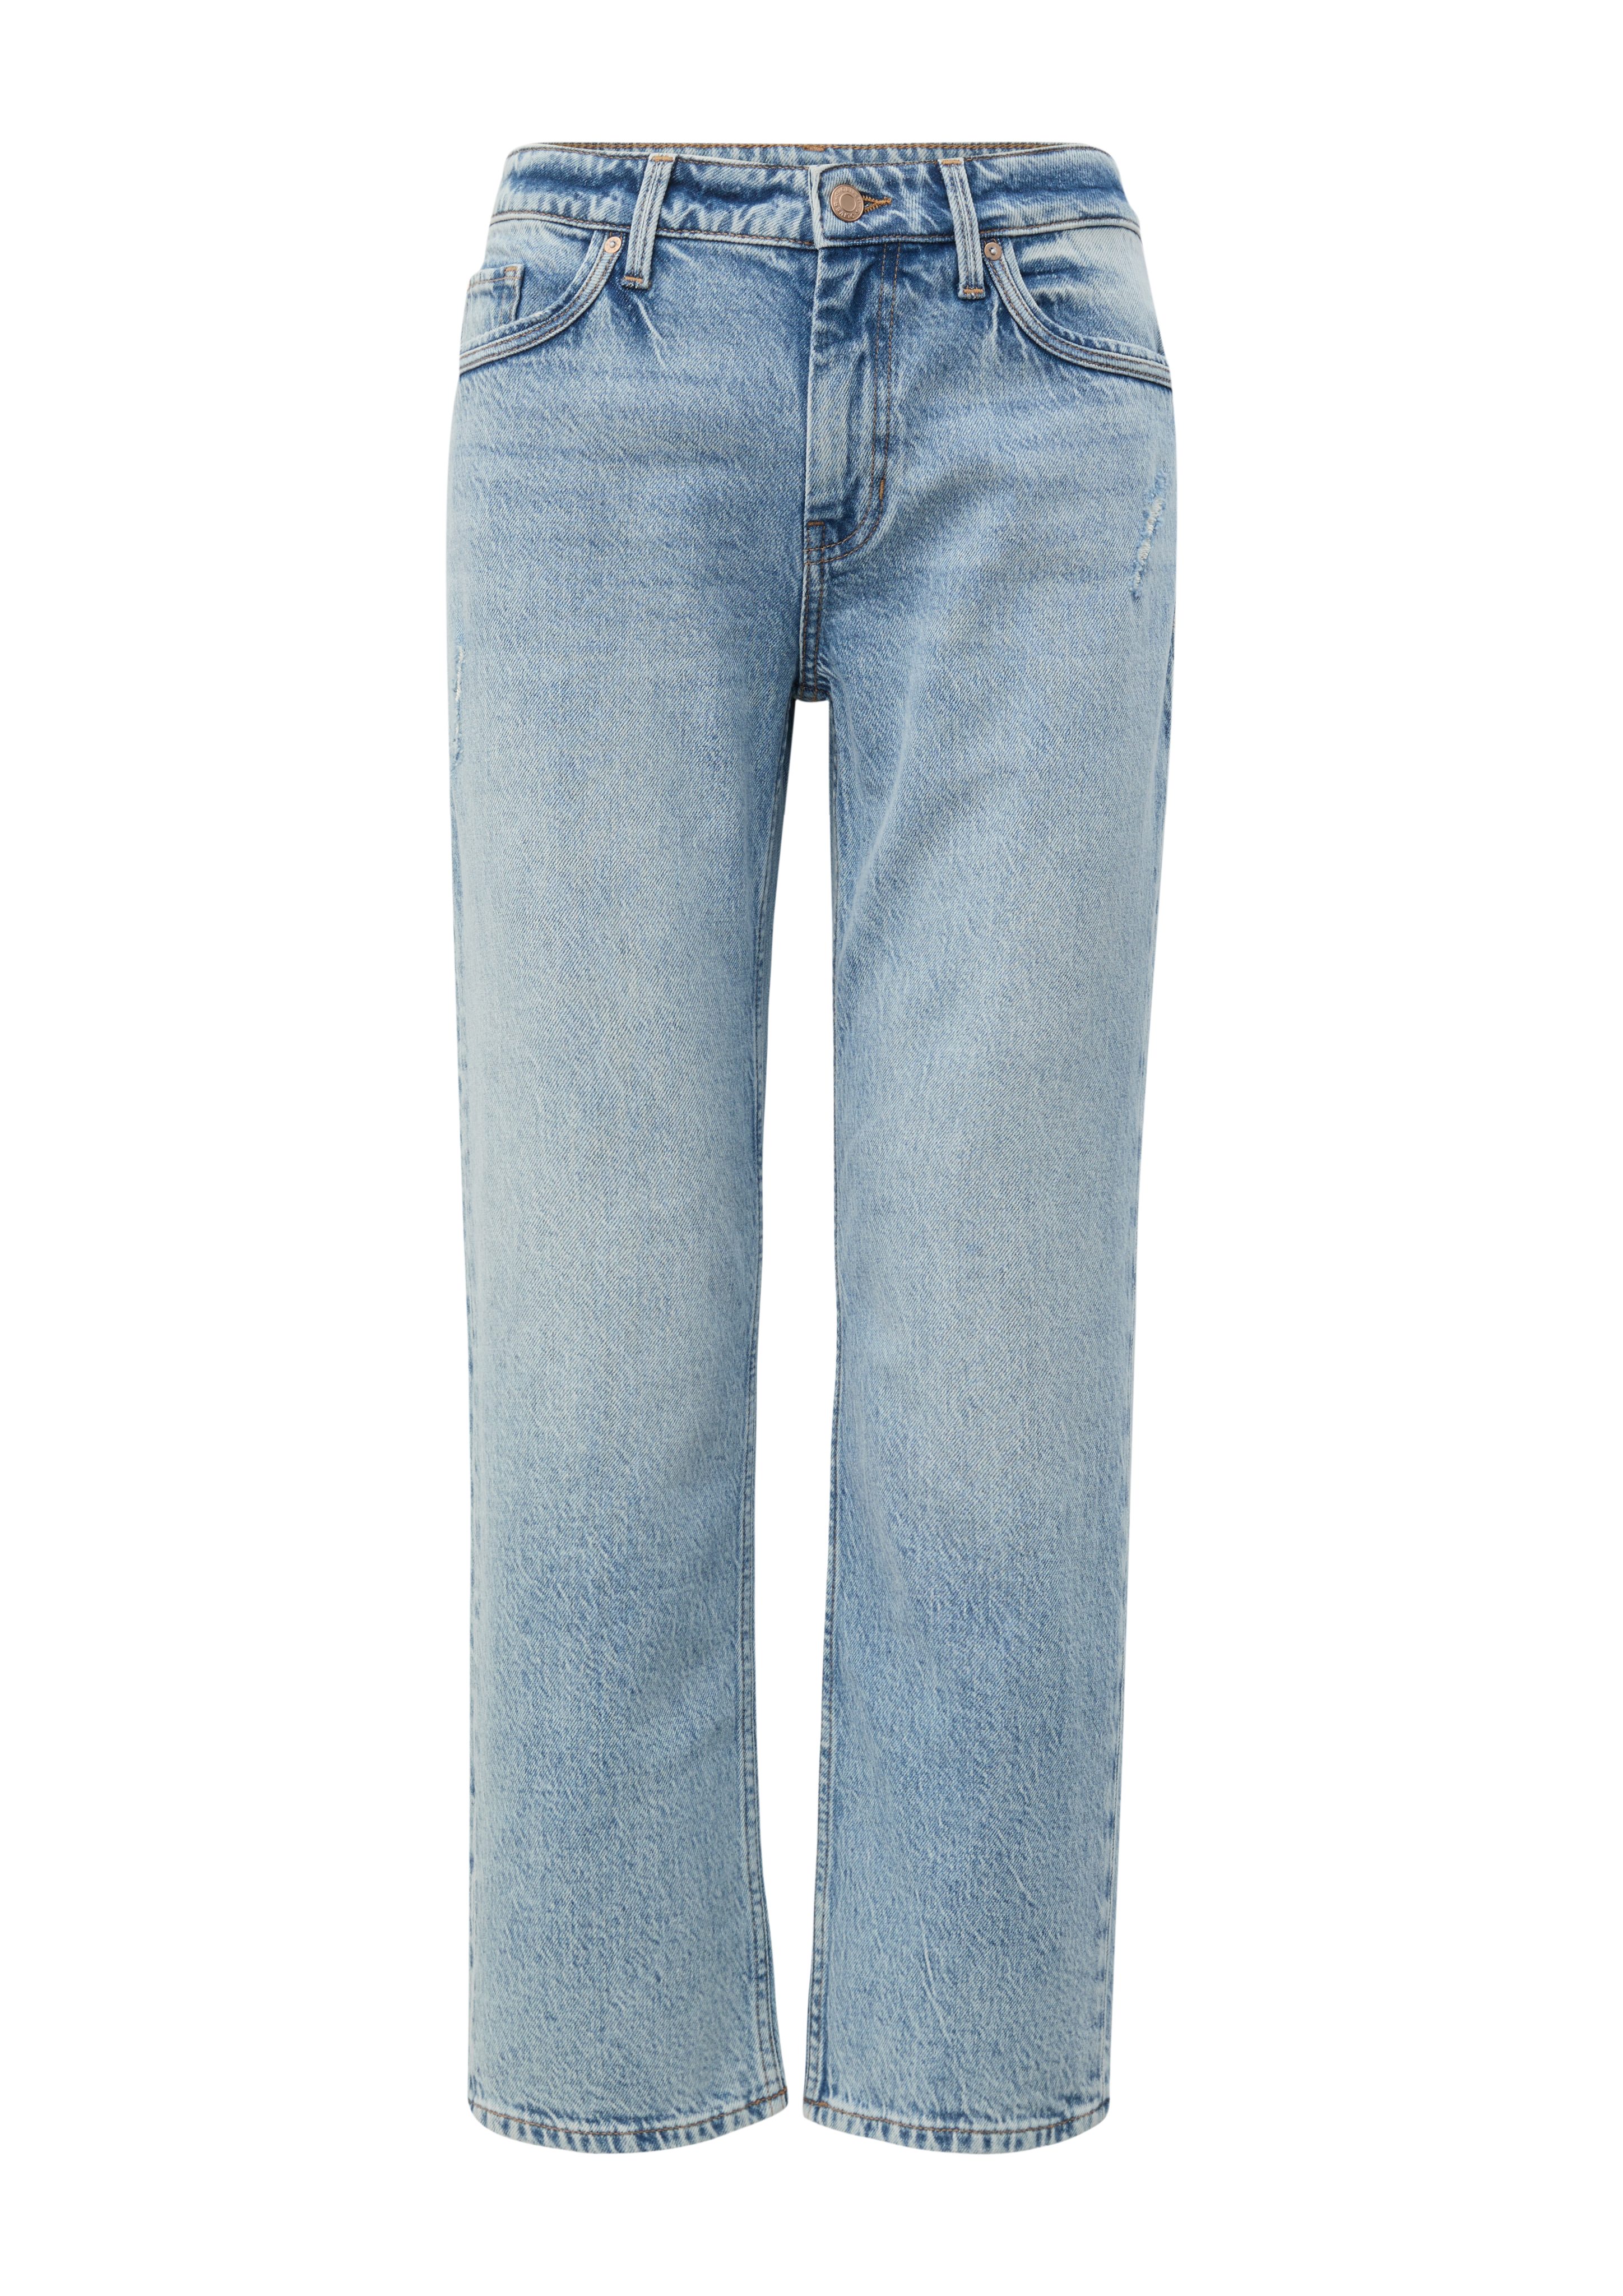 Straight Cropped-Jeans 7/8-Jeans / Waschung / Fit / Regular Rise Leg s.Oliver Karolin Mid